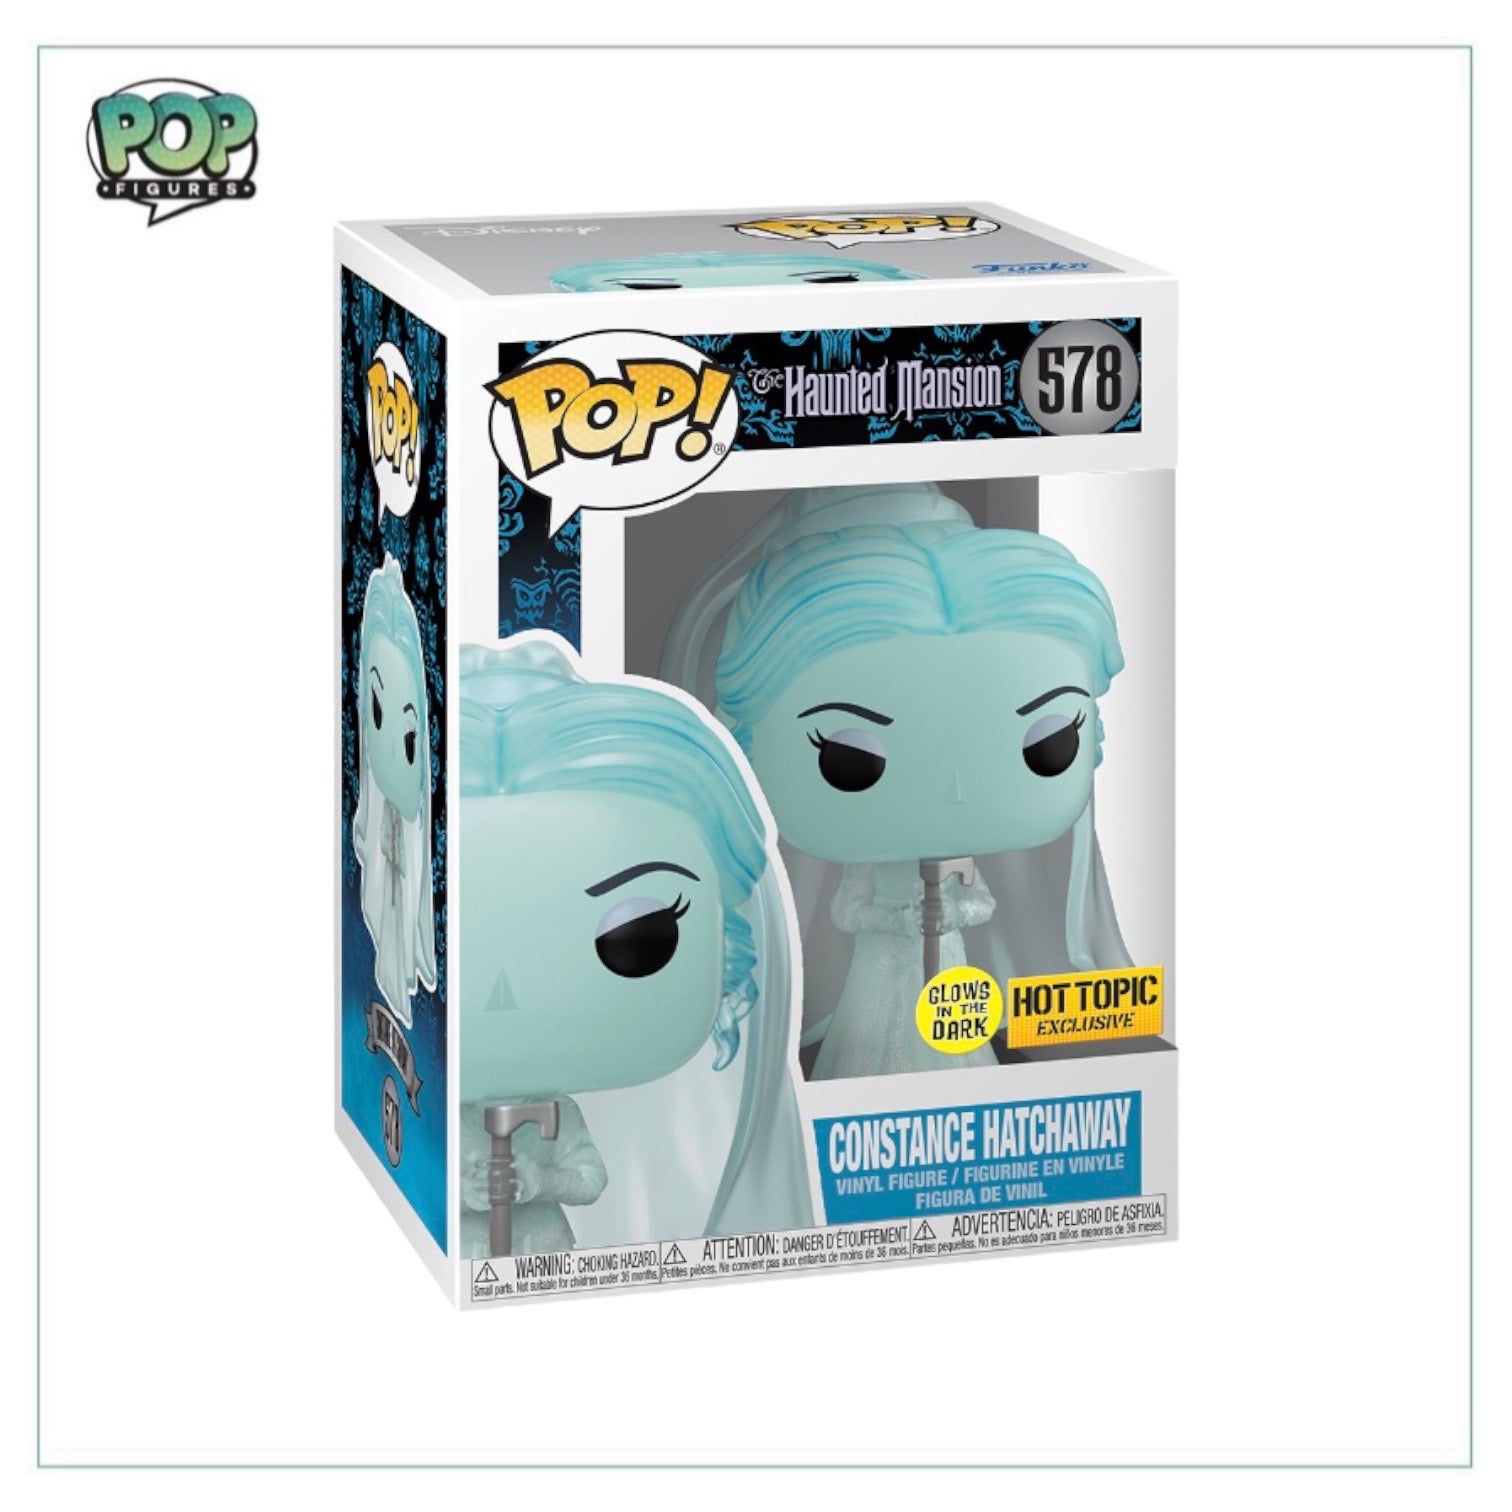 Constance Hatchaway #578 (Glows in the Dark) Funko Pop! - The Haunted Mansion - Hot Topic Exclusive